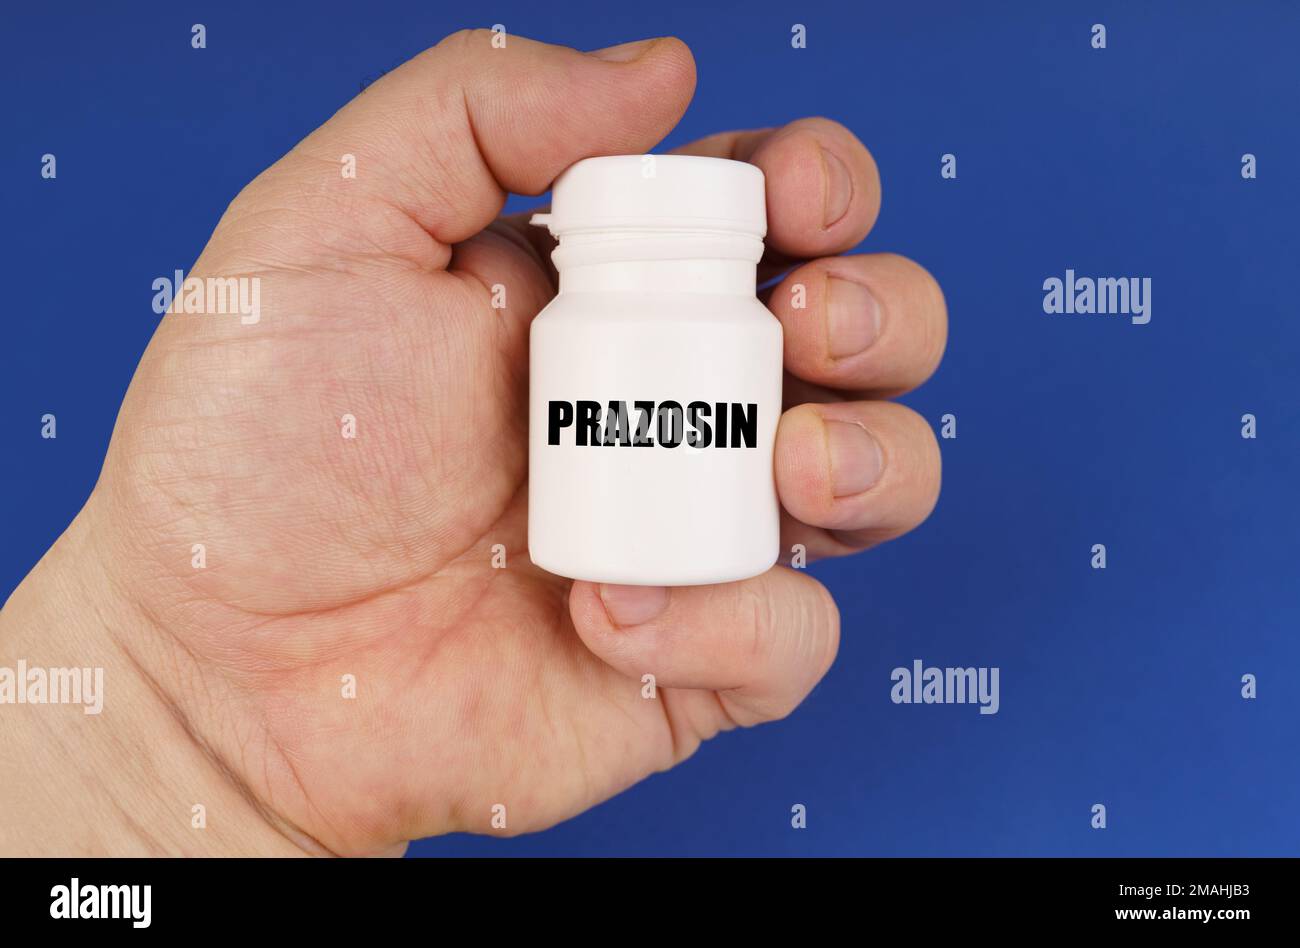 Pharmacology concept. On a blue background in the hands of a man is a white jar with the inscription - Prazosin Stock Photo